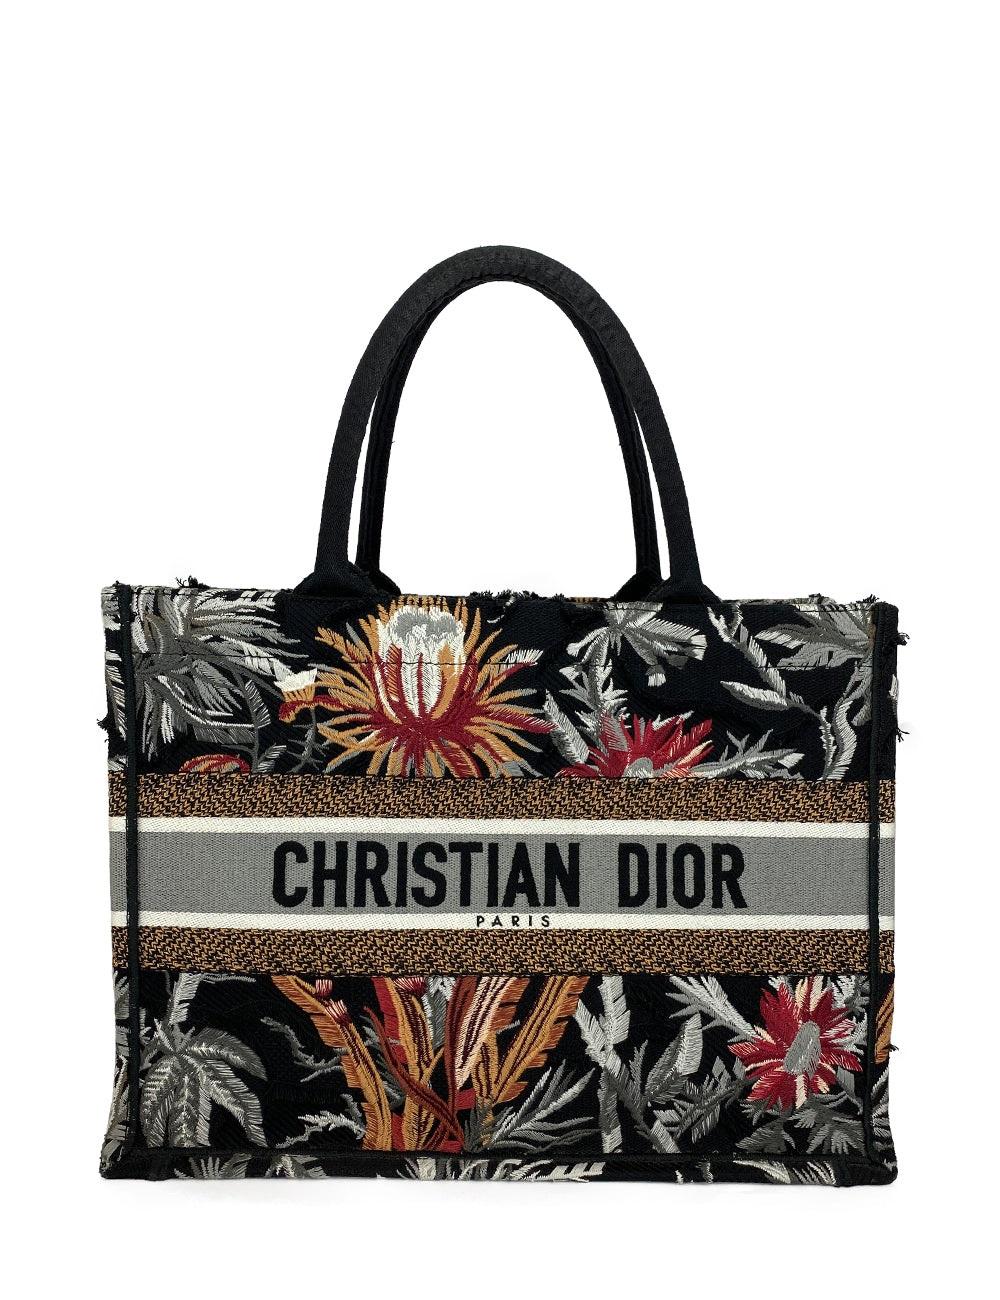 Christian Dior floral print canvas medium book tote bag, with red and orange accents, 'CHRISTIAN DIOR PARIS' signature on the front, open top and dual handles. Spacious interior

Additional information:
Material:Textile
Measurements: 36 W x 16.5 D x